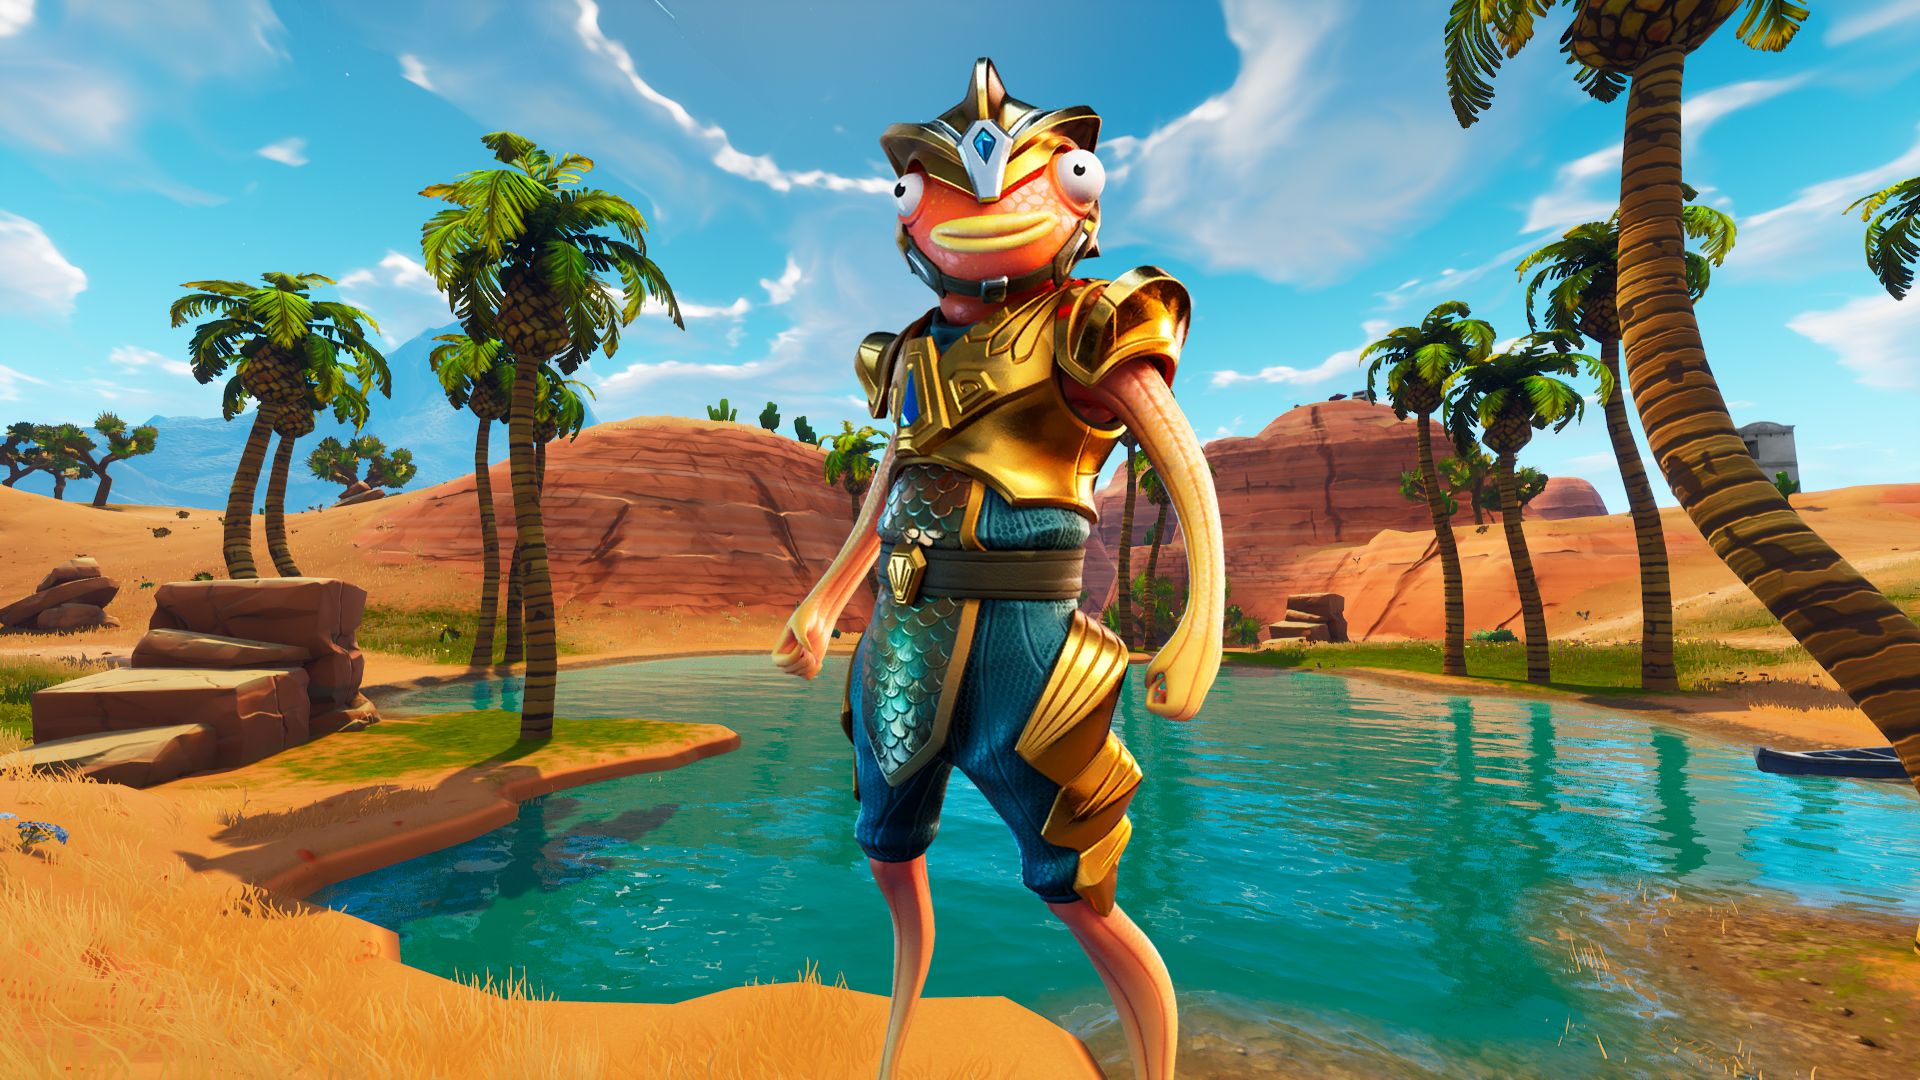 Atlantean Fishstick Fortnite Wallpaper You Need to Know About New Fortnite Fishstick Outfit!